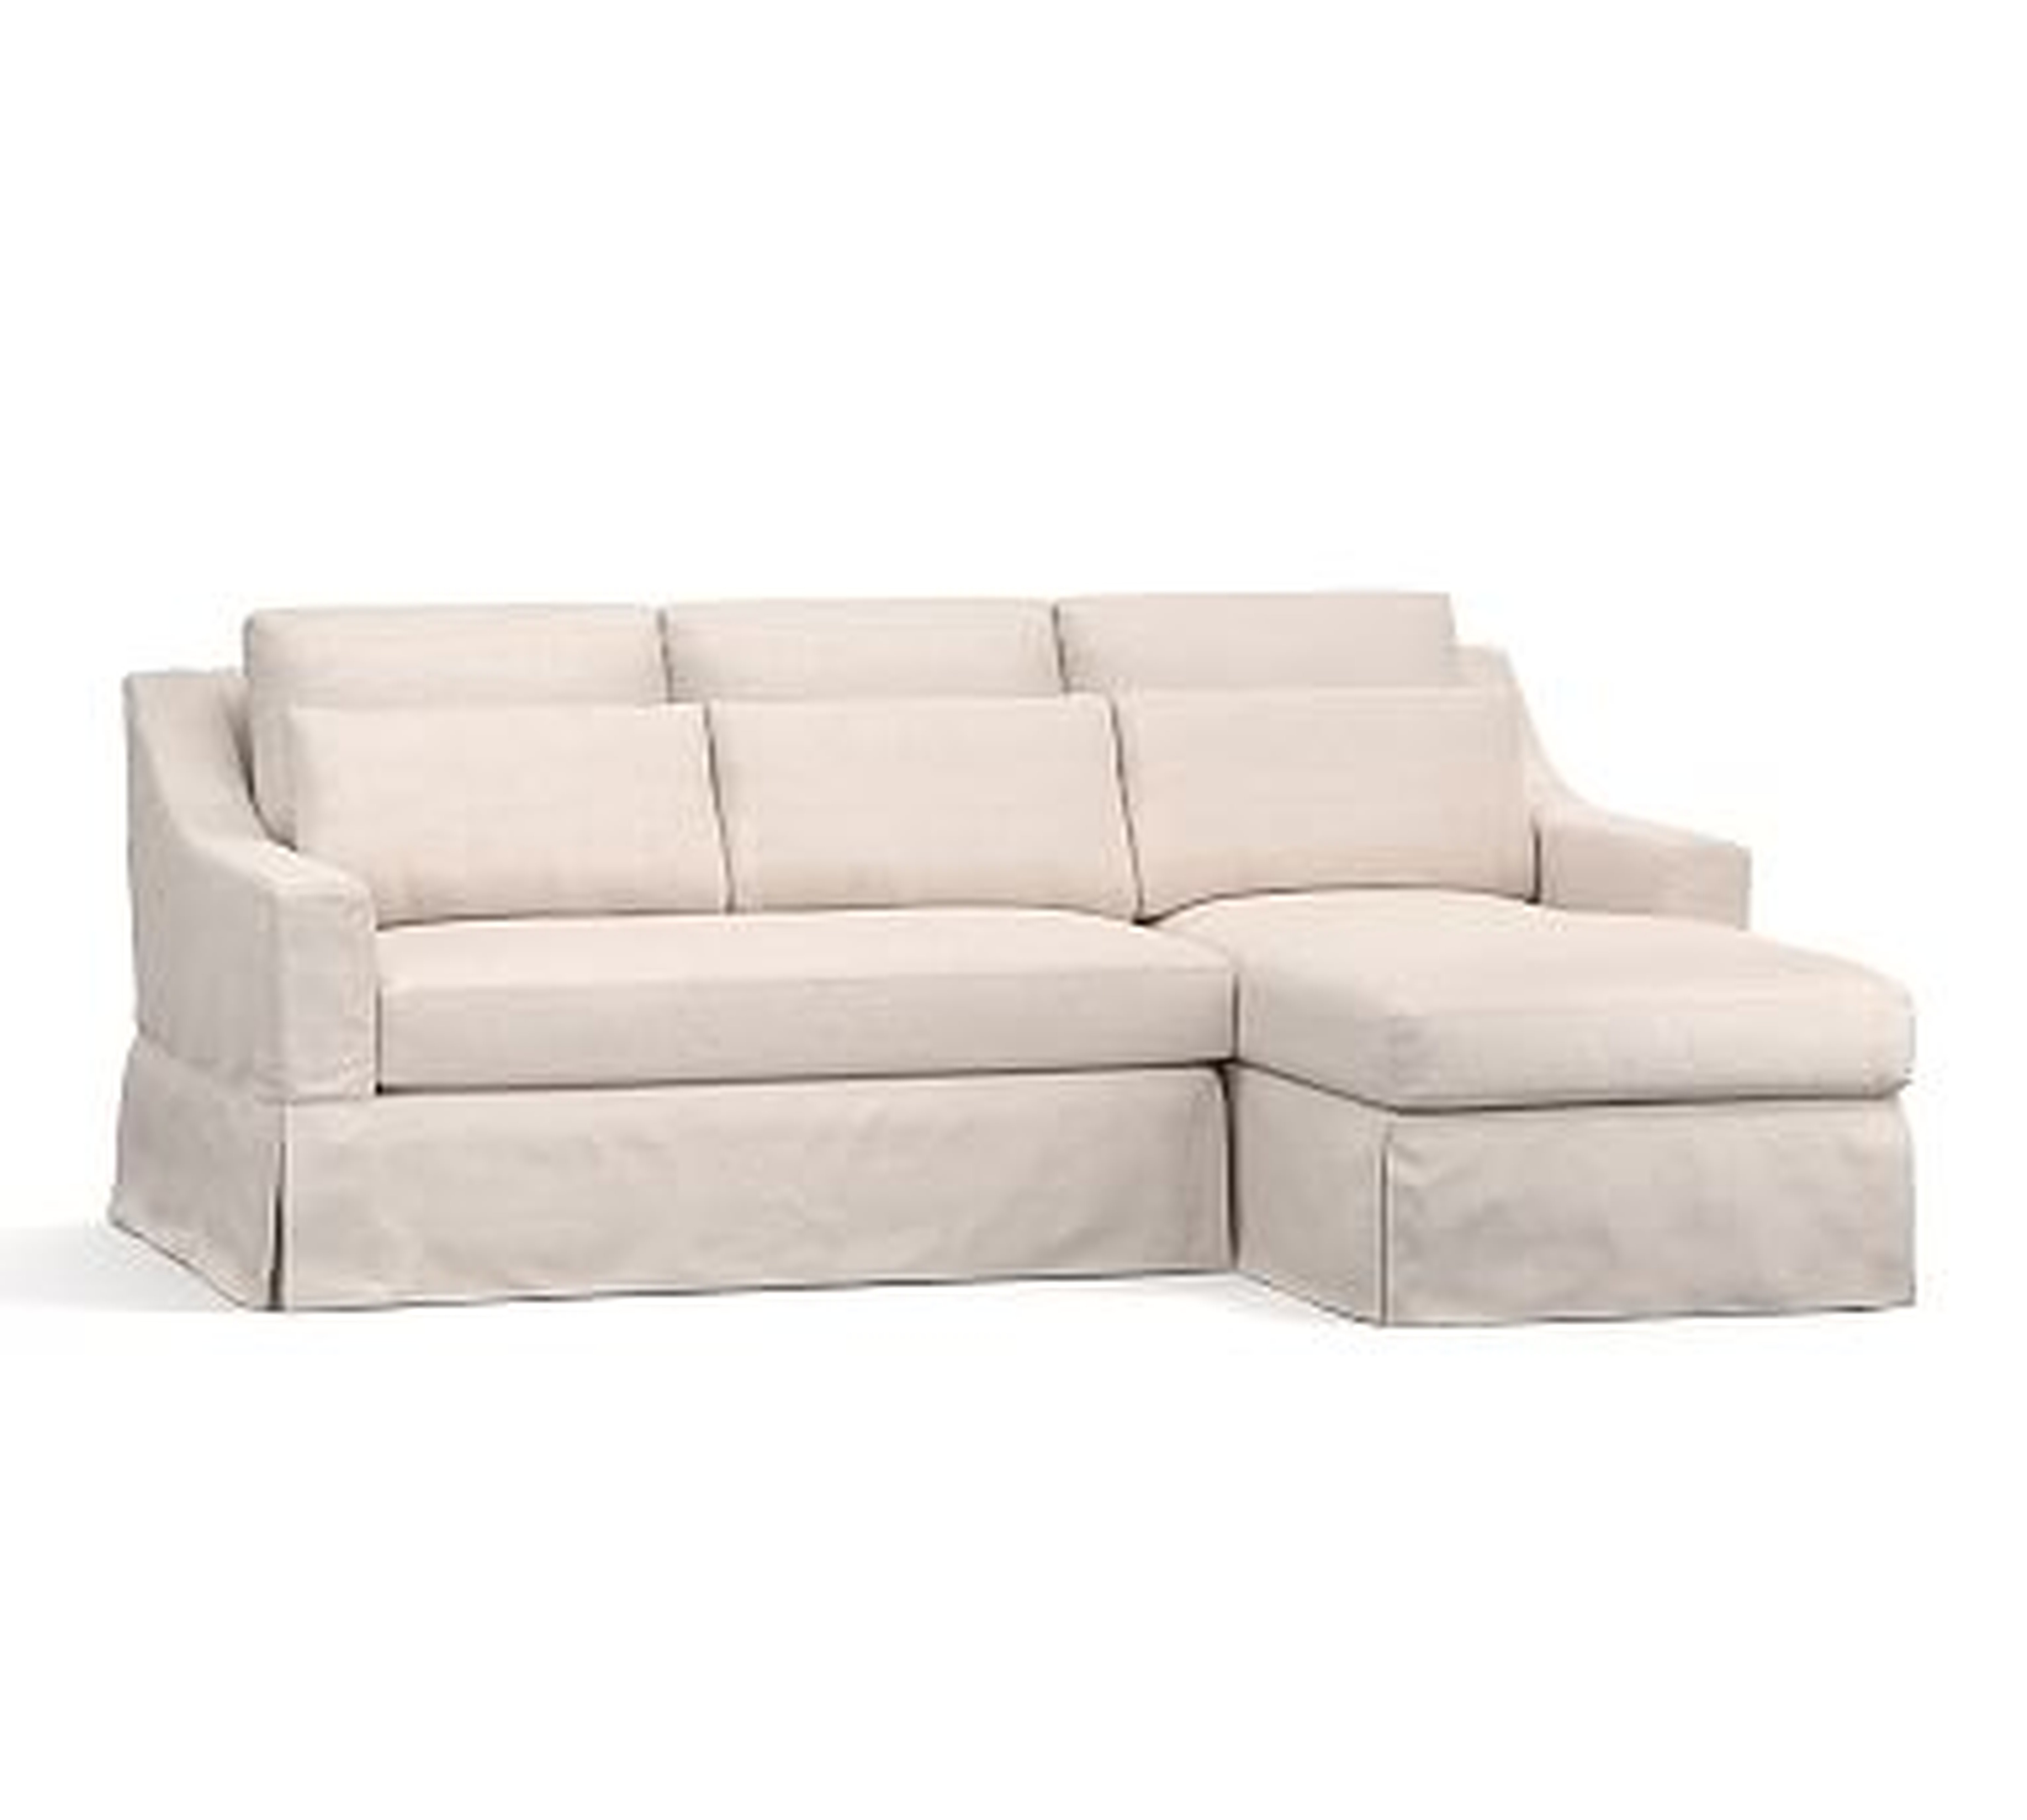 York Slope Arm Slipcovered Deep Seat Left Arm Loveseat with Chaise Sectional with Bench Cushion, Down Blend Wrapped Cushions, Performance Slub Cotton White - Pottery Barn